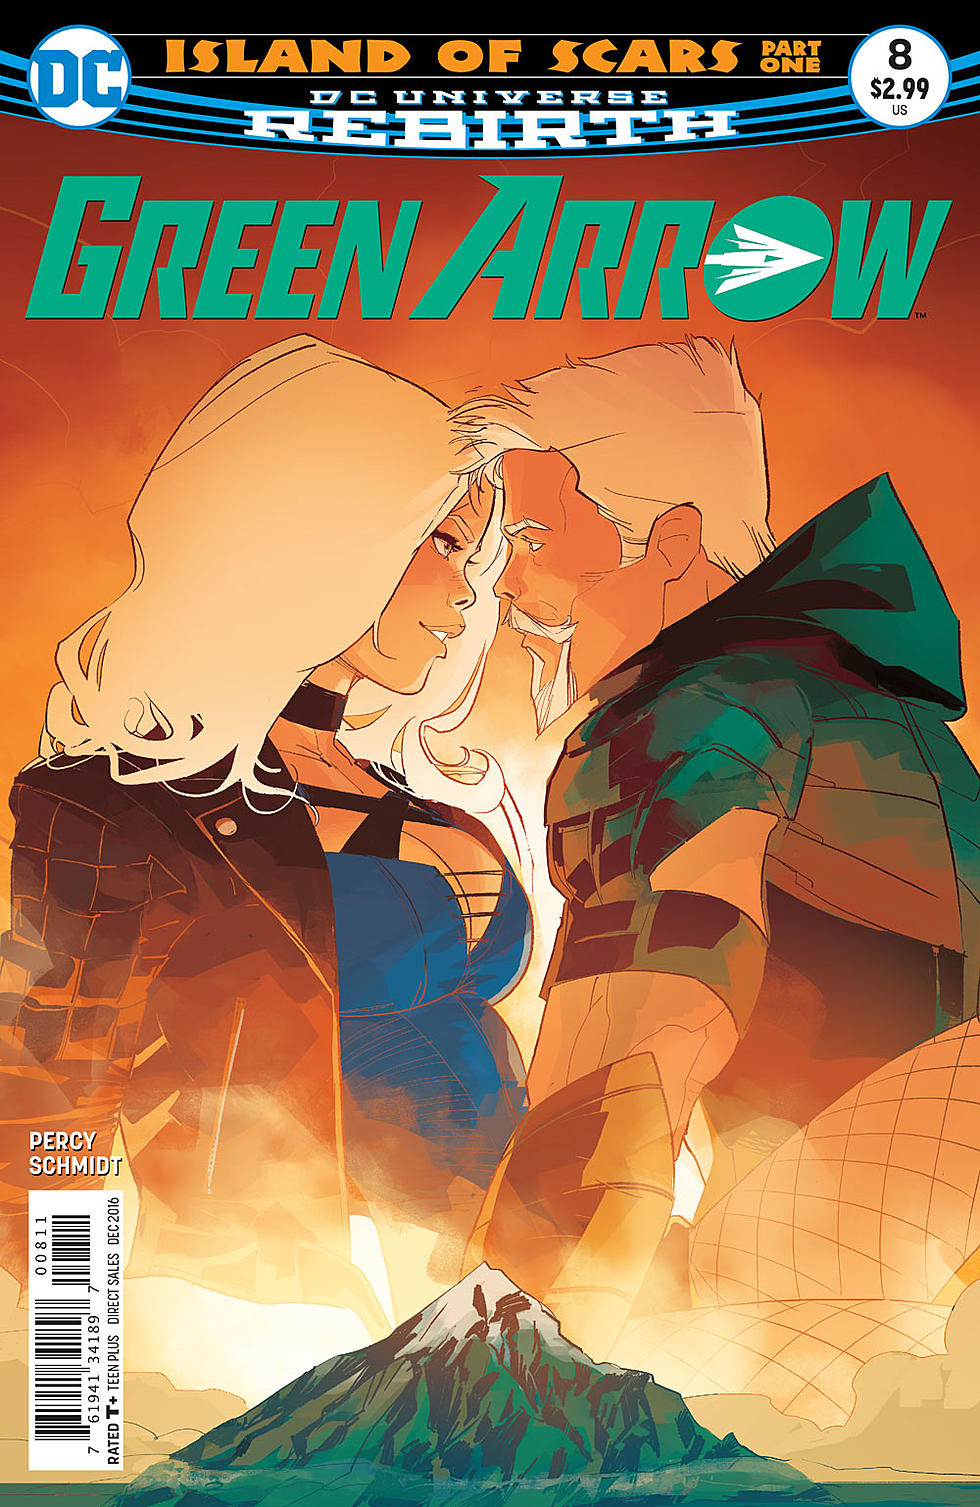 Journey To The Island Of Scars In Percy &#038; Schmidt&#8217;s &#8216;Green Arrow&#8217; #8 [Preview]